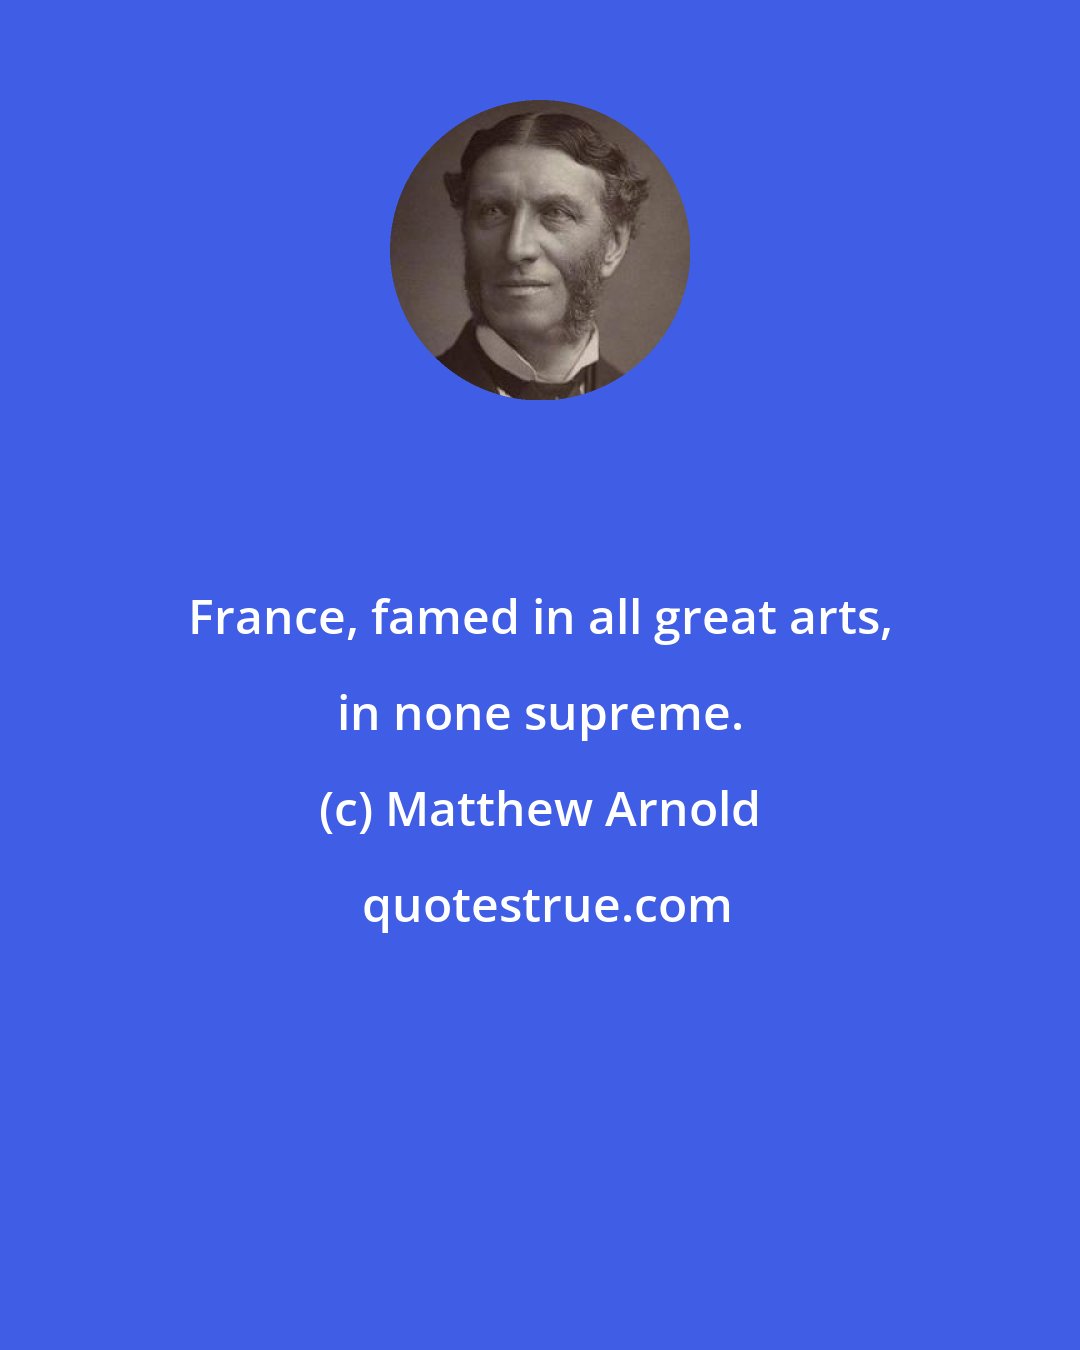 Matthew Arnold: France, famed in all great arts, in none supreme.